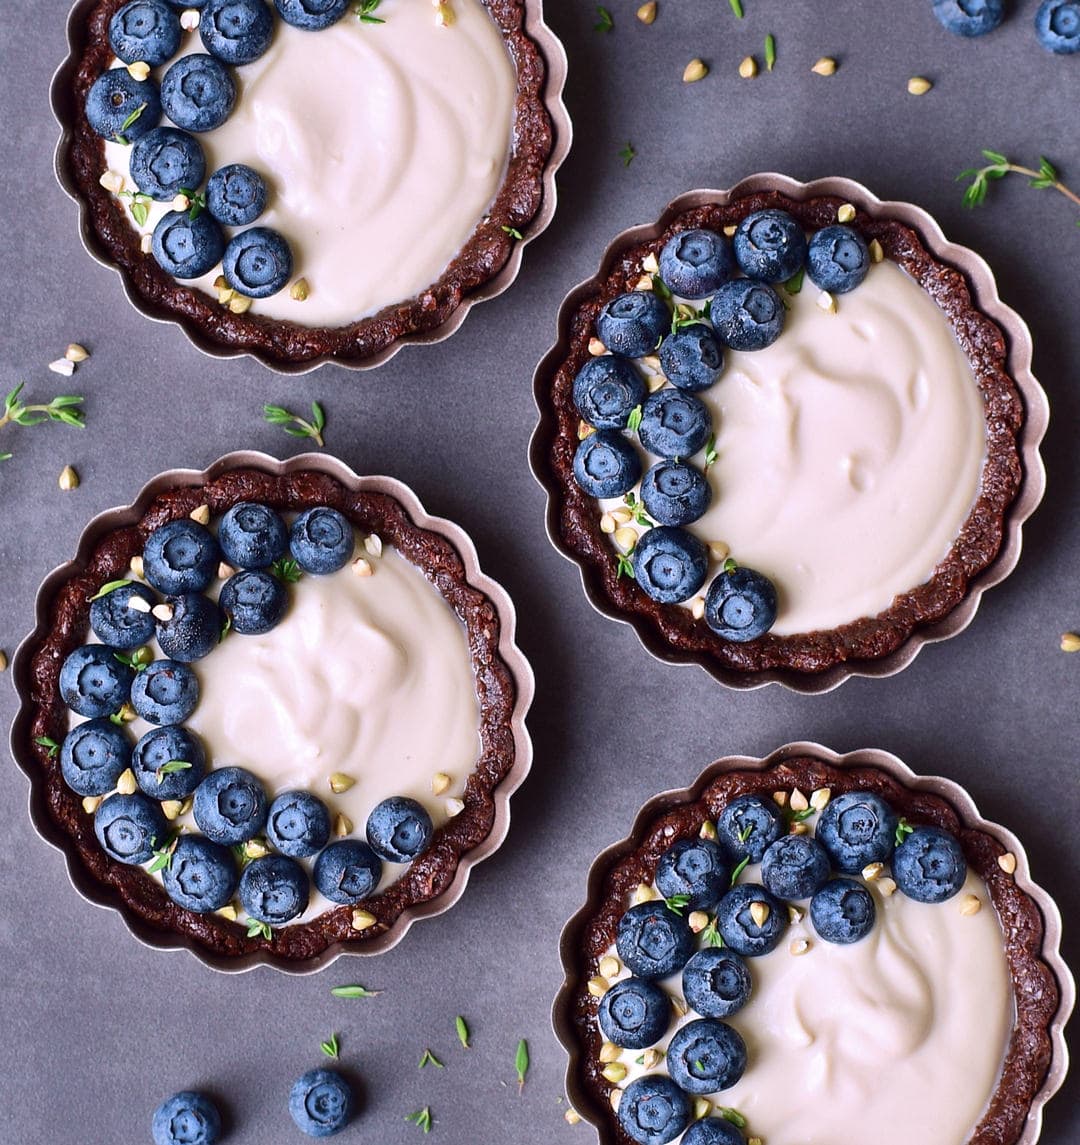 Vegan cheesecake tarts, which are easy to make, gluten-free, refined sugar free, nut-free, and 100% plant-based. The recipe requires no baking. Creamy and delicious dessert which is ready in no time